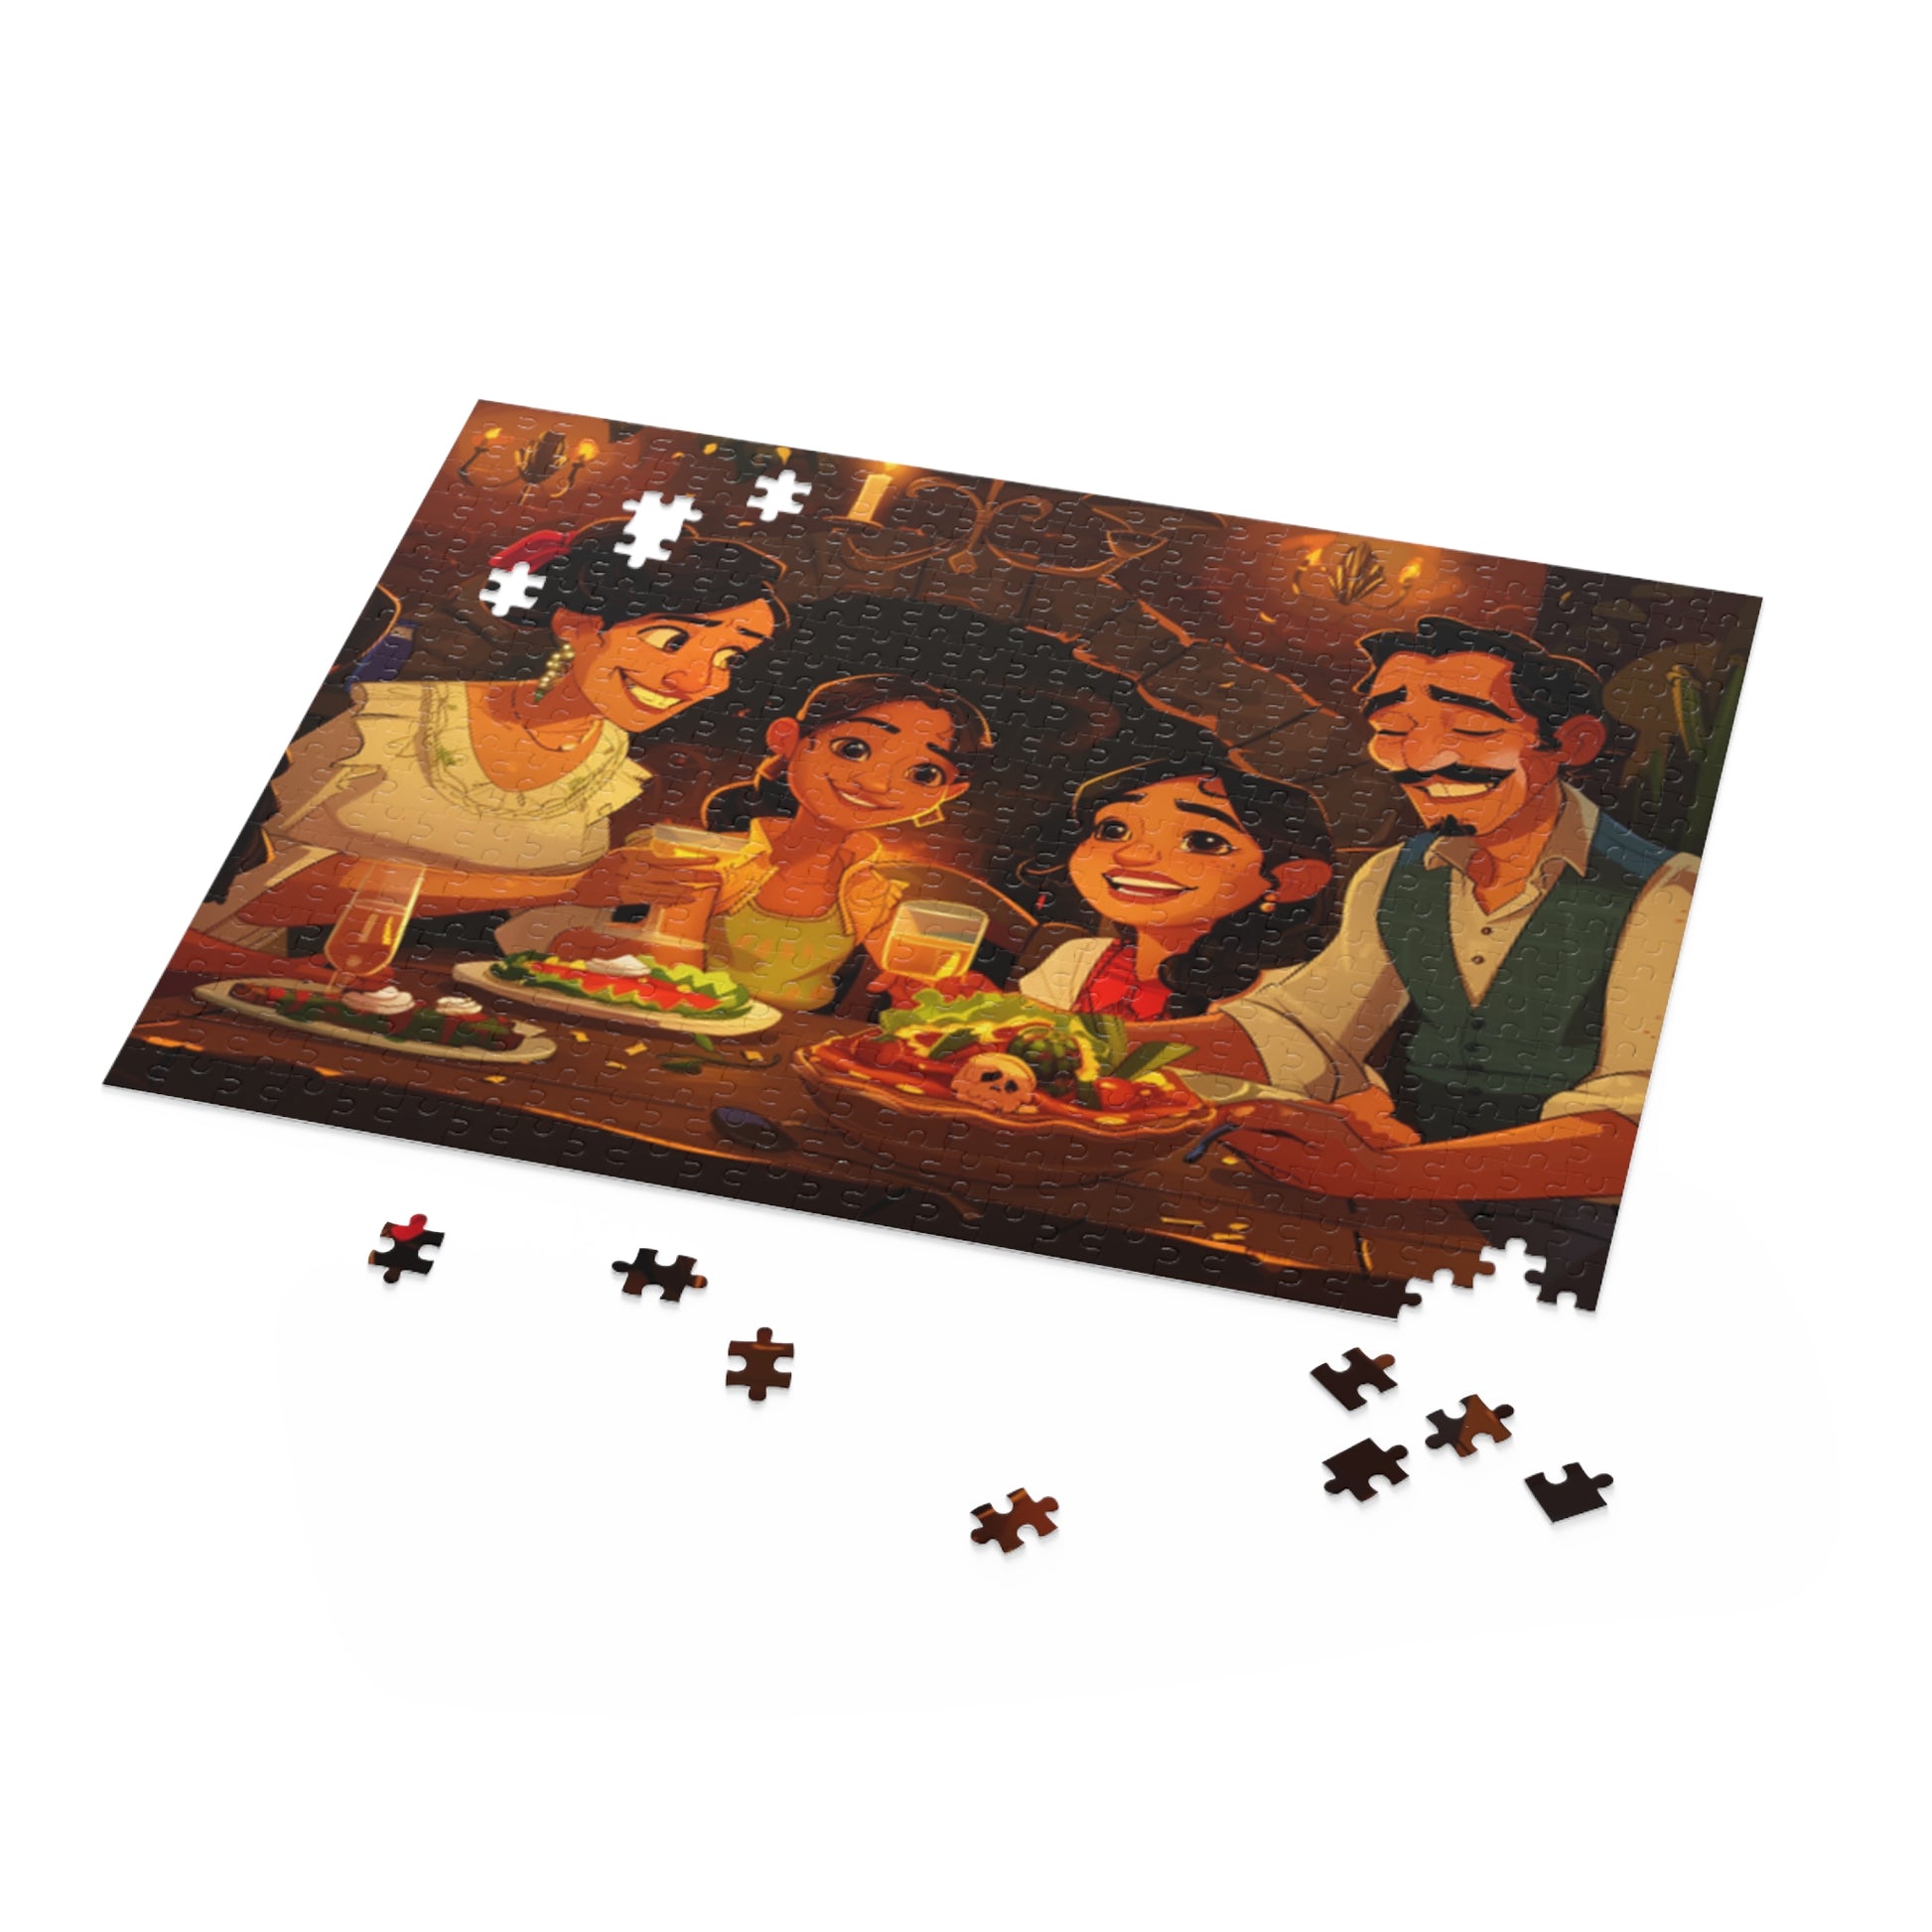 Mexican Lovely Family Dinner Retro Art Jigsaw Puzzle Adult Birthday Business Jigsaw Puzzle Gift for Him Funny Humorous Indoor Outdoor Game Gift For Her Online-5